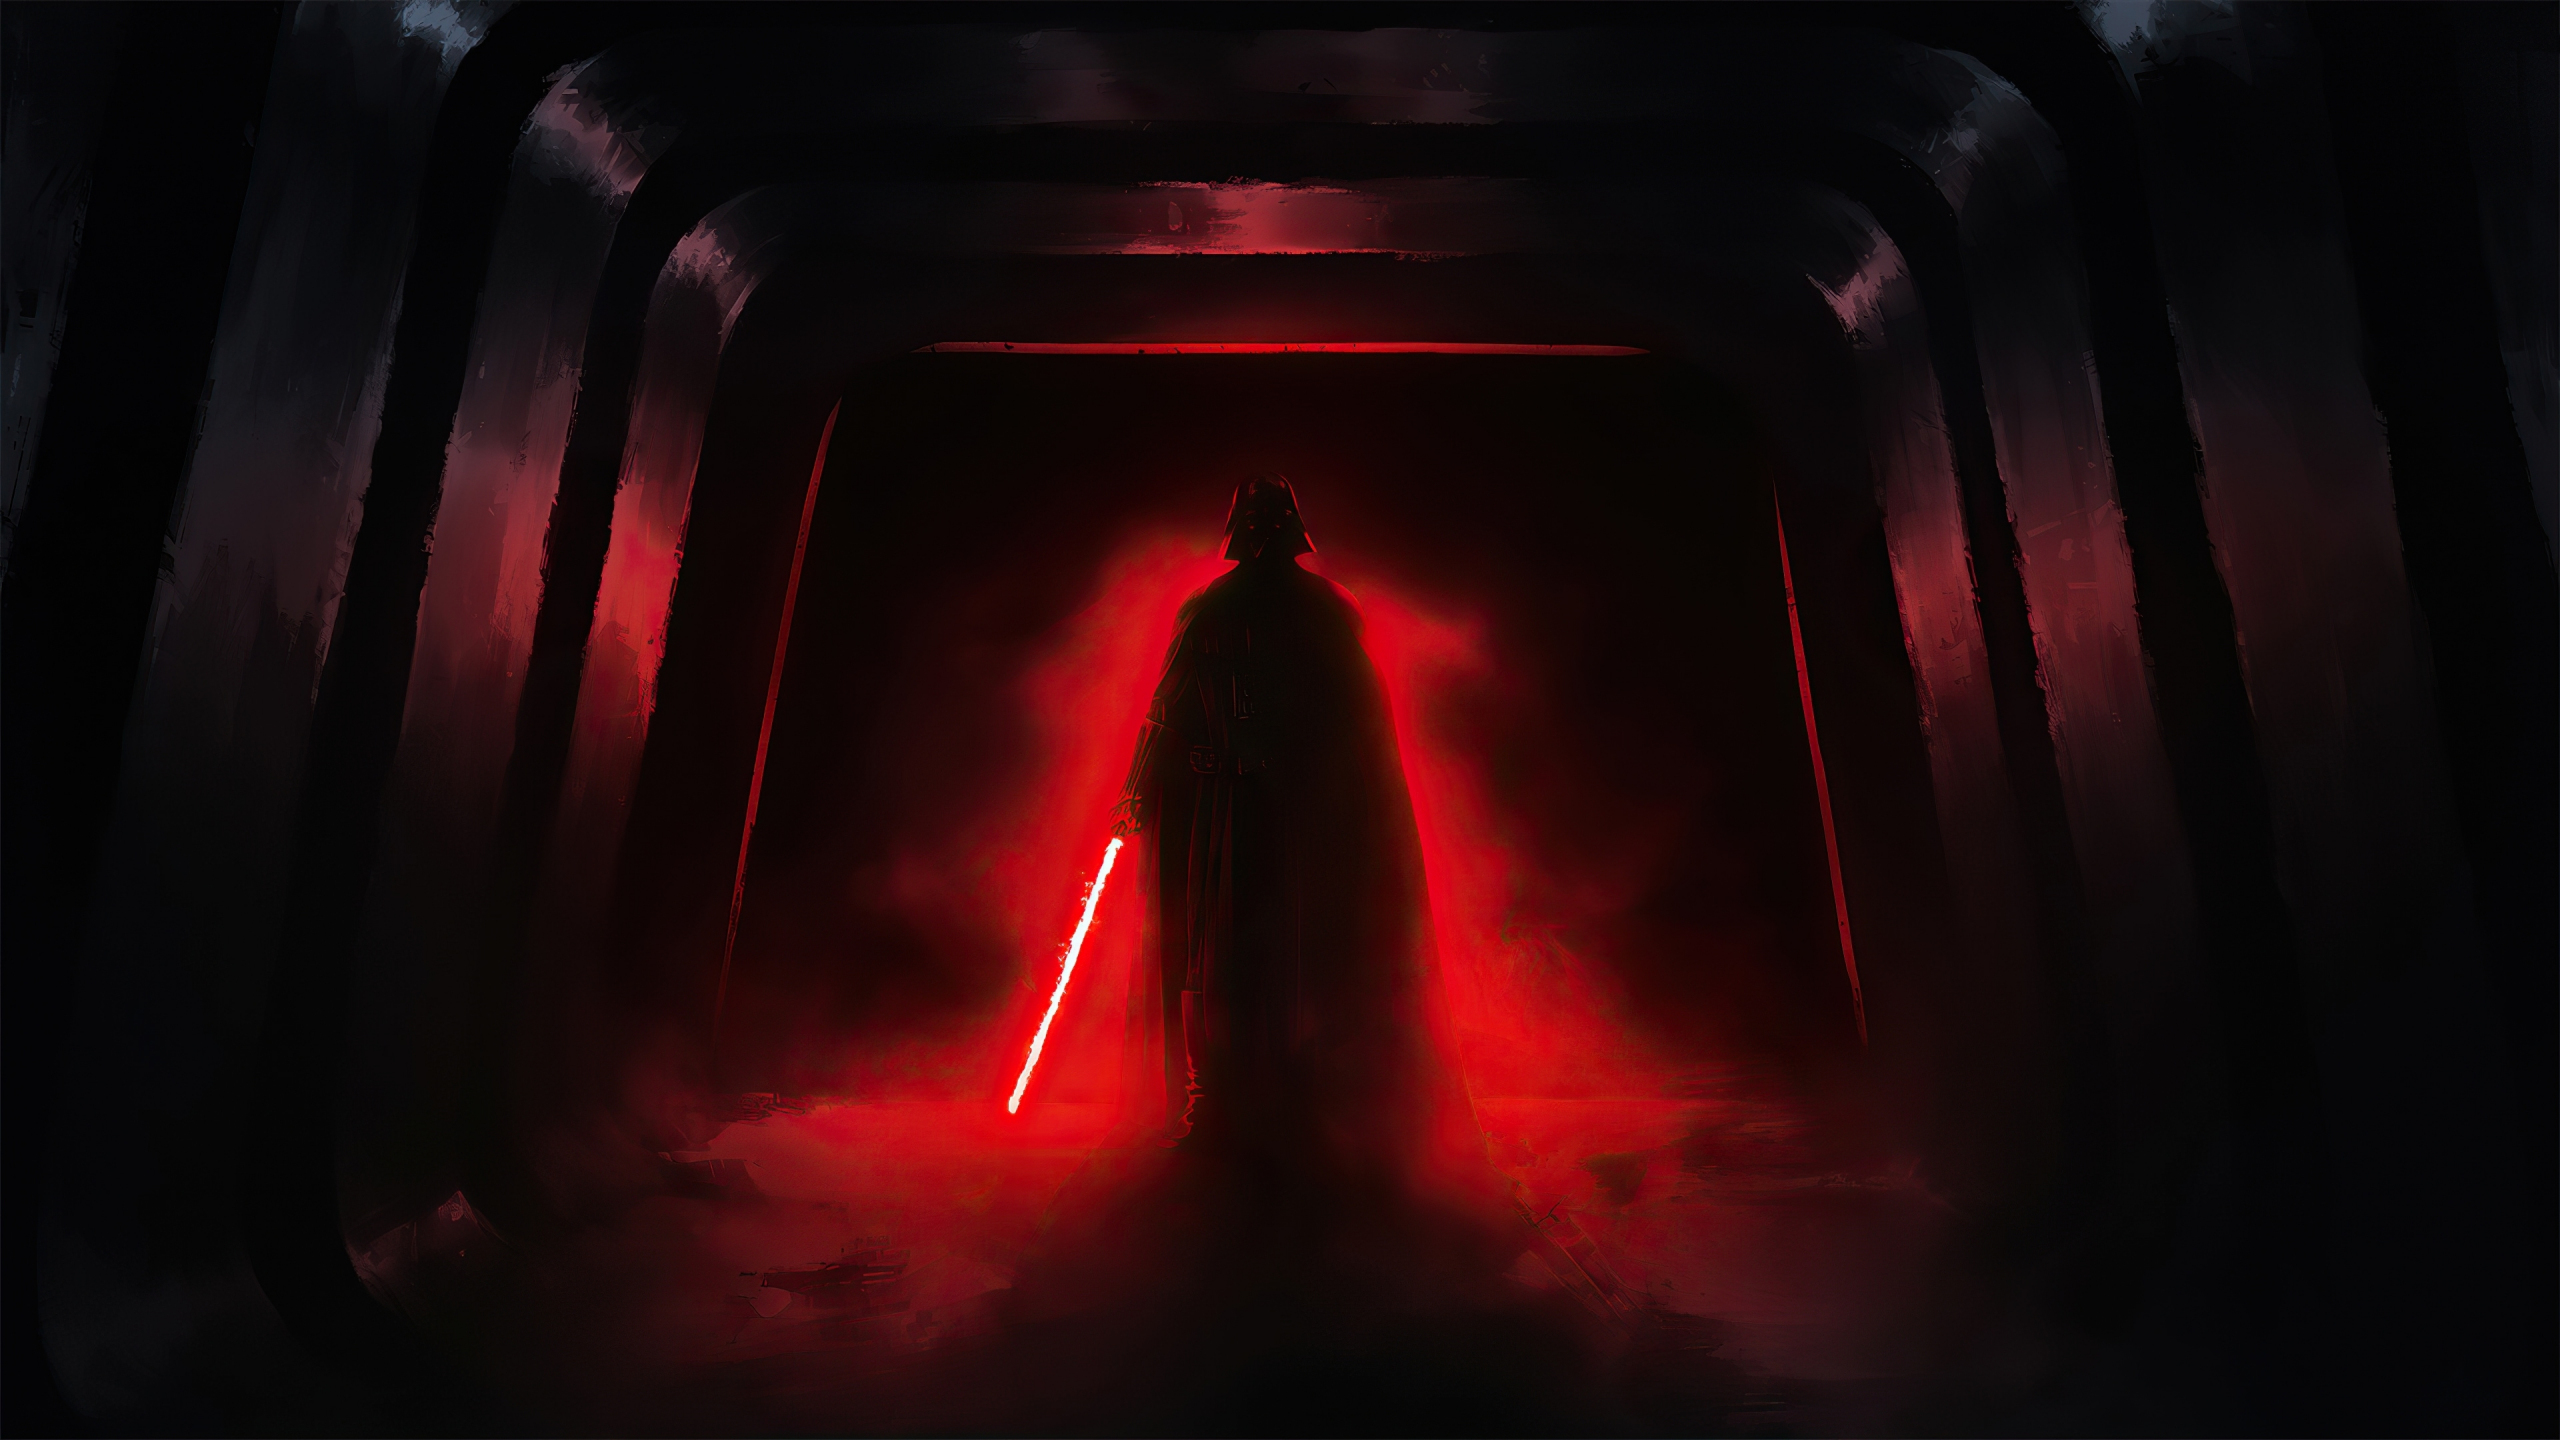 Download wallpaper 2560x1440 darth vader with red light-bar, dark, dual  wide 16:9 2560x1440 hd background, 26616